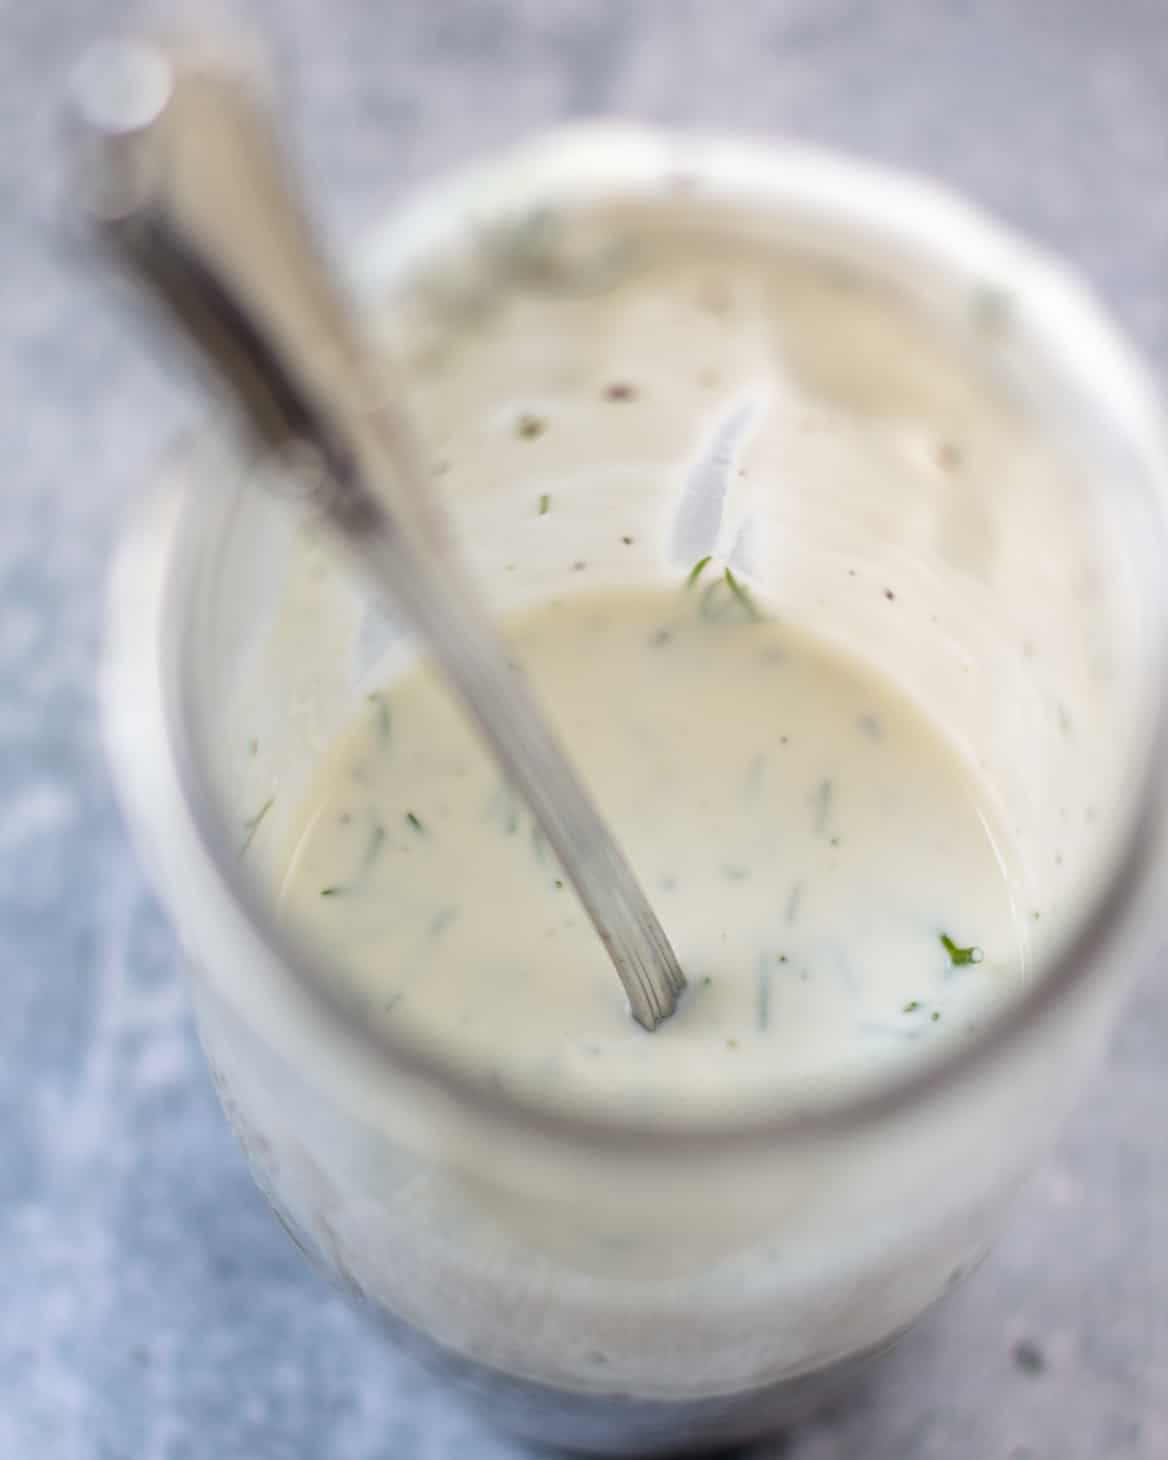 Ranch dressing takes less than 5 minutes to prep